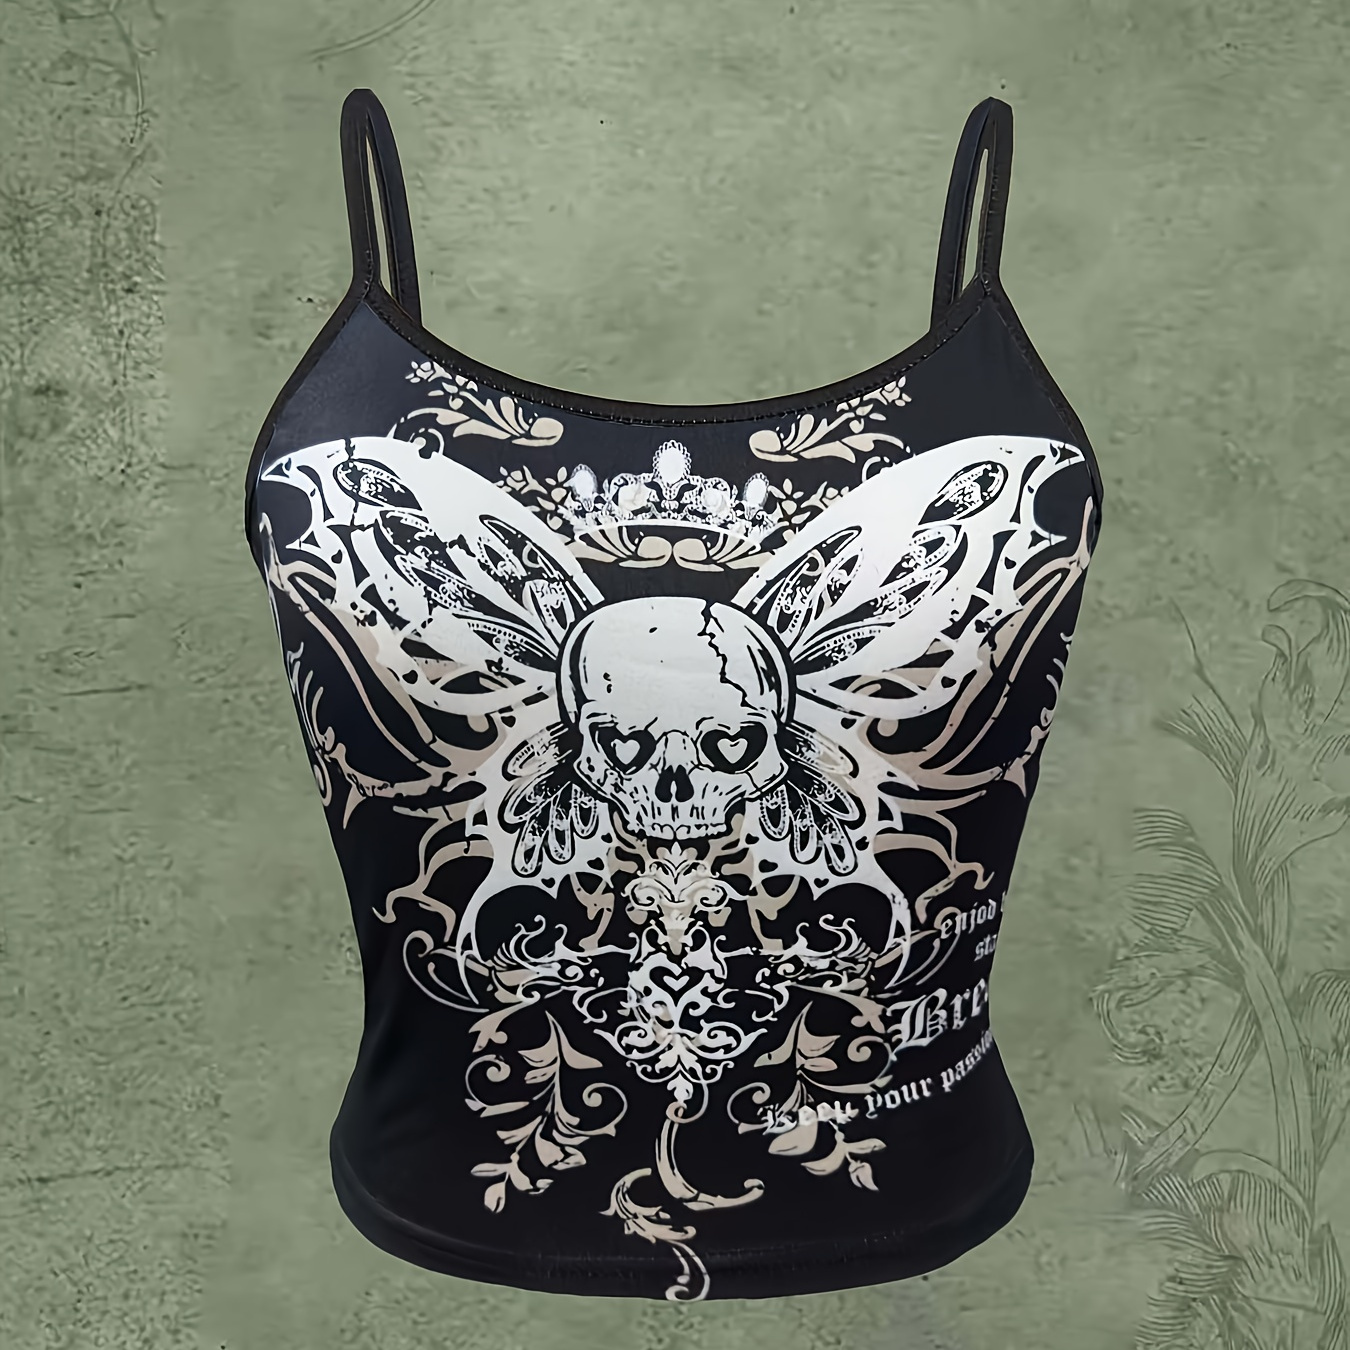 

Skull Print Spaghetti Trap Top, Y2k Sleeveless Crop Top For Spring & Summer, Women's Clothing